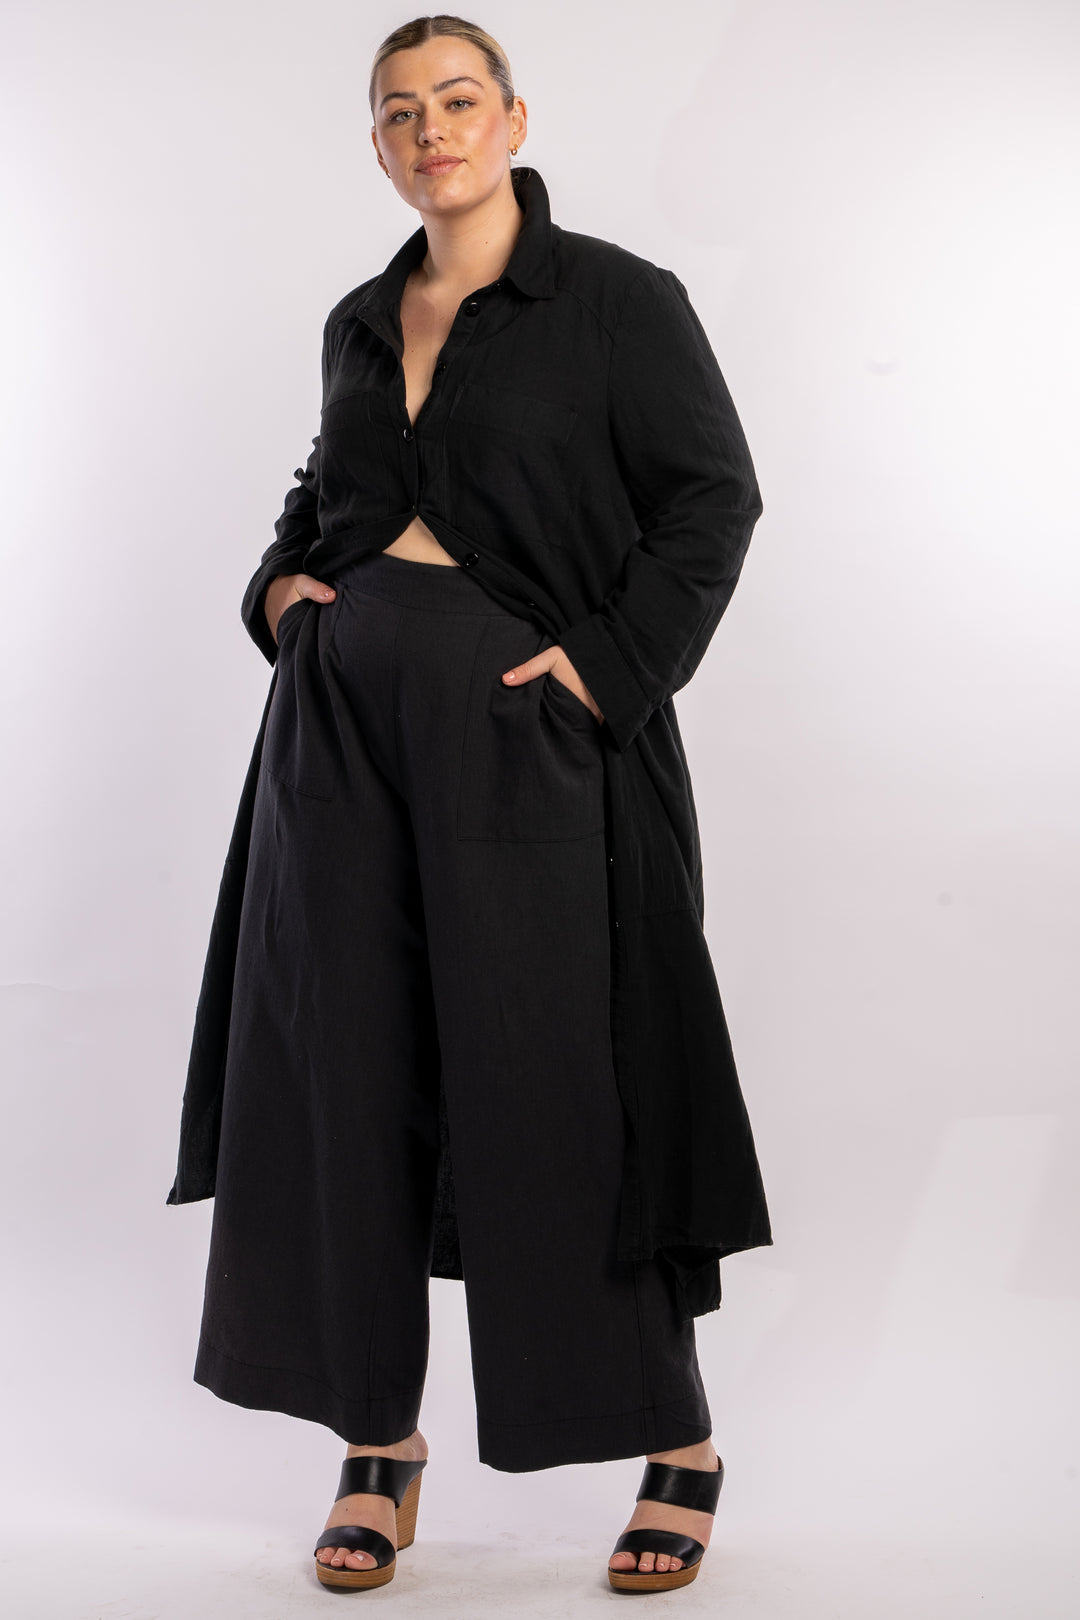 Here Comes The Sun Wide Leg Linen Pant - Black - ONLY ONE XS (12-14)